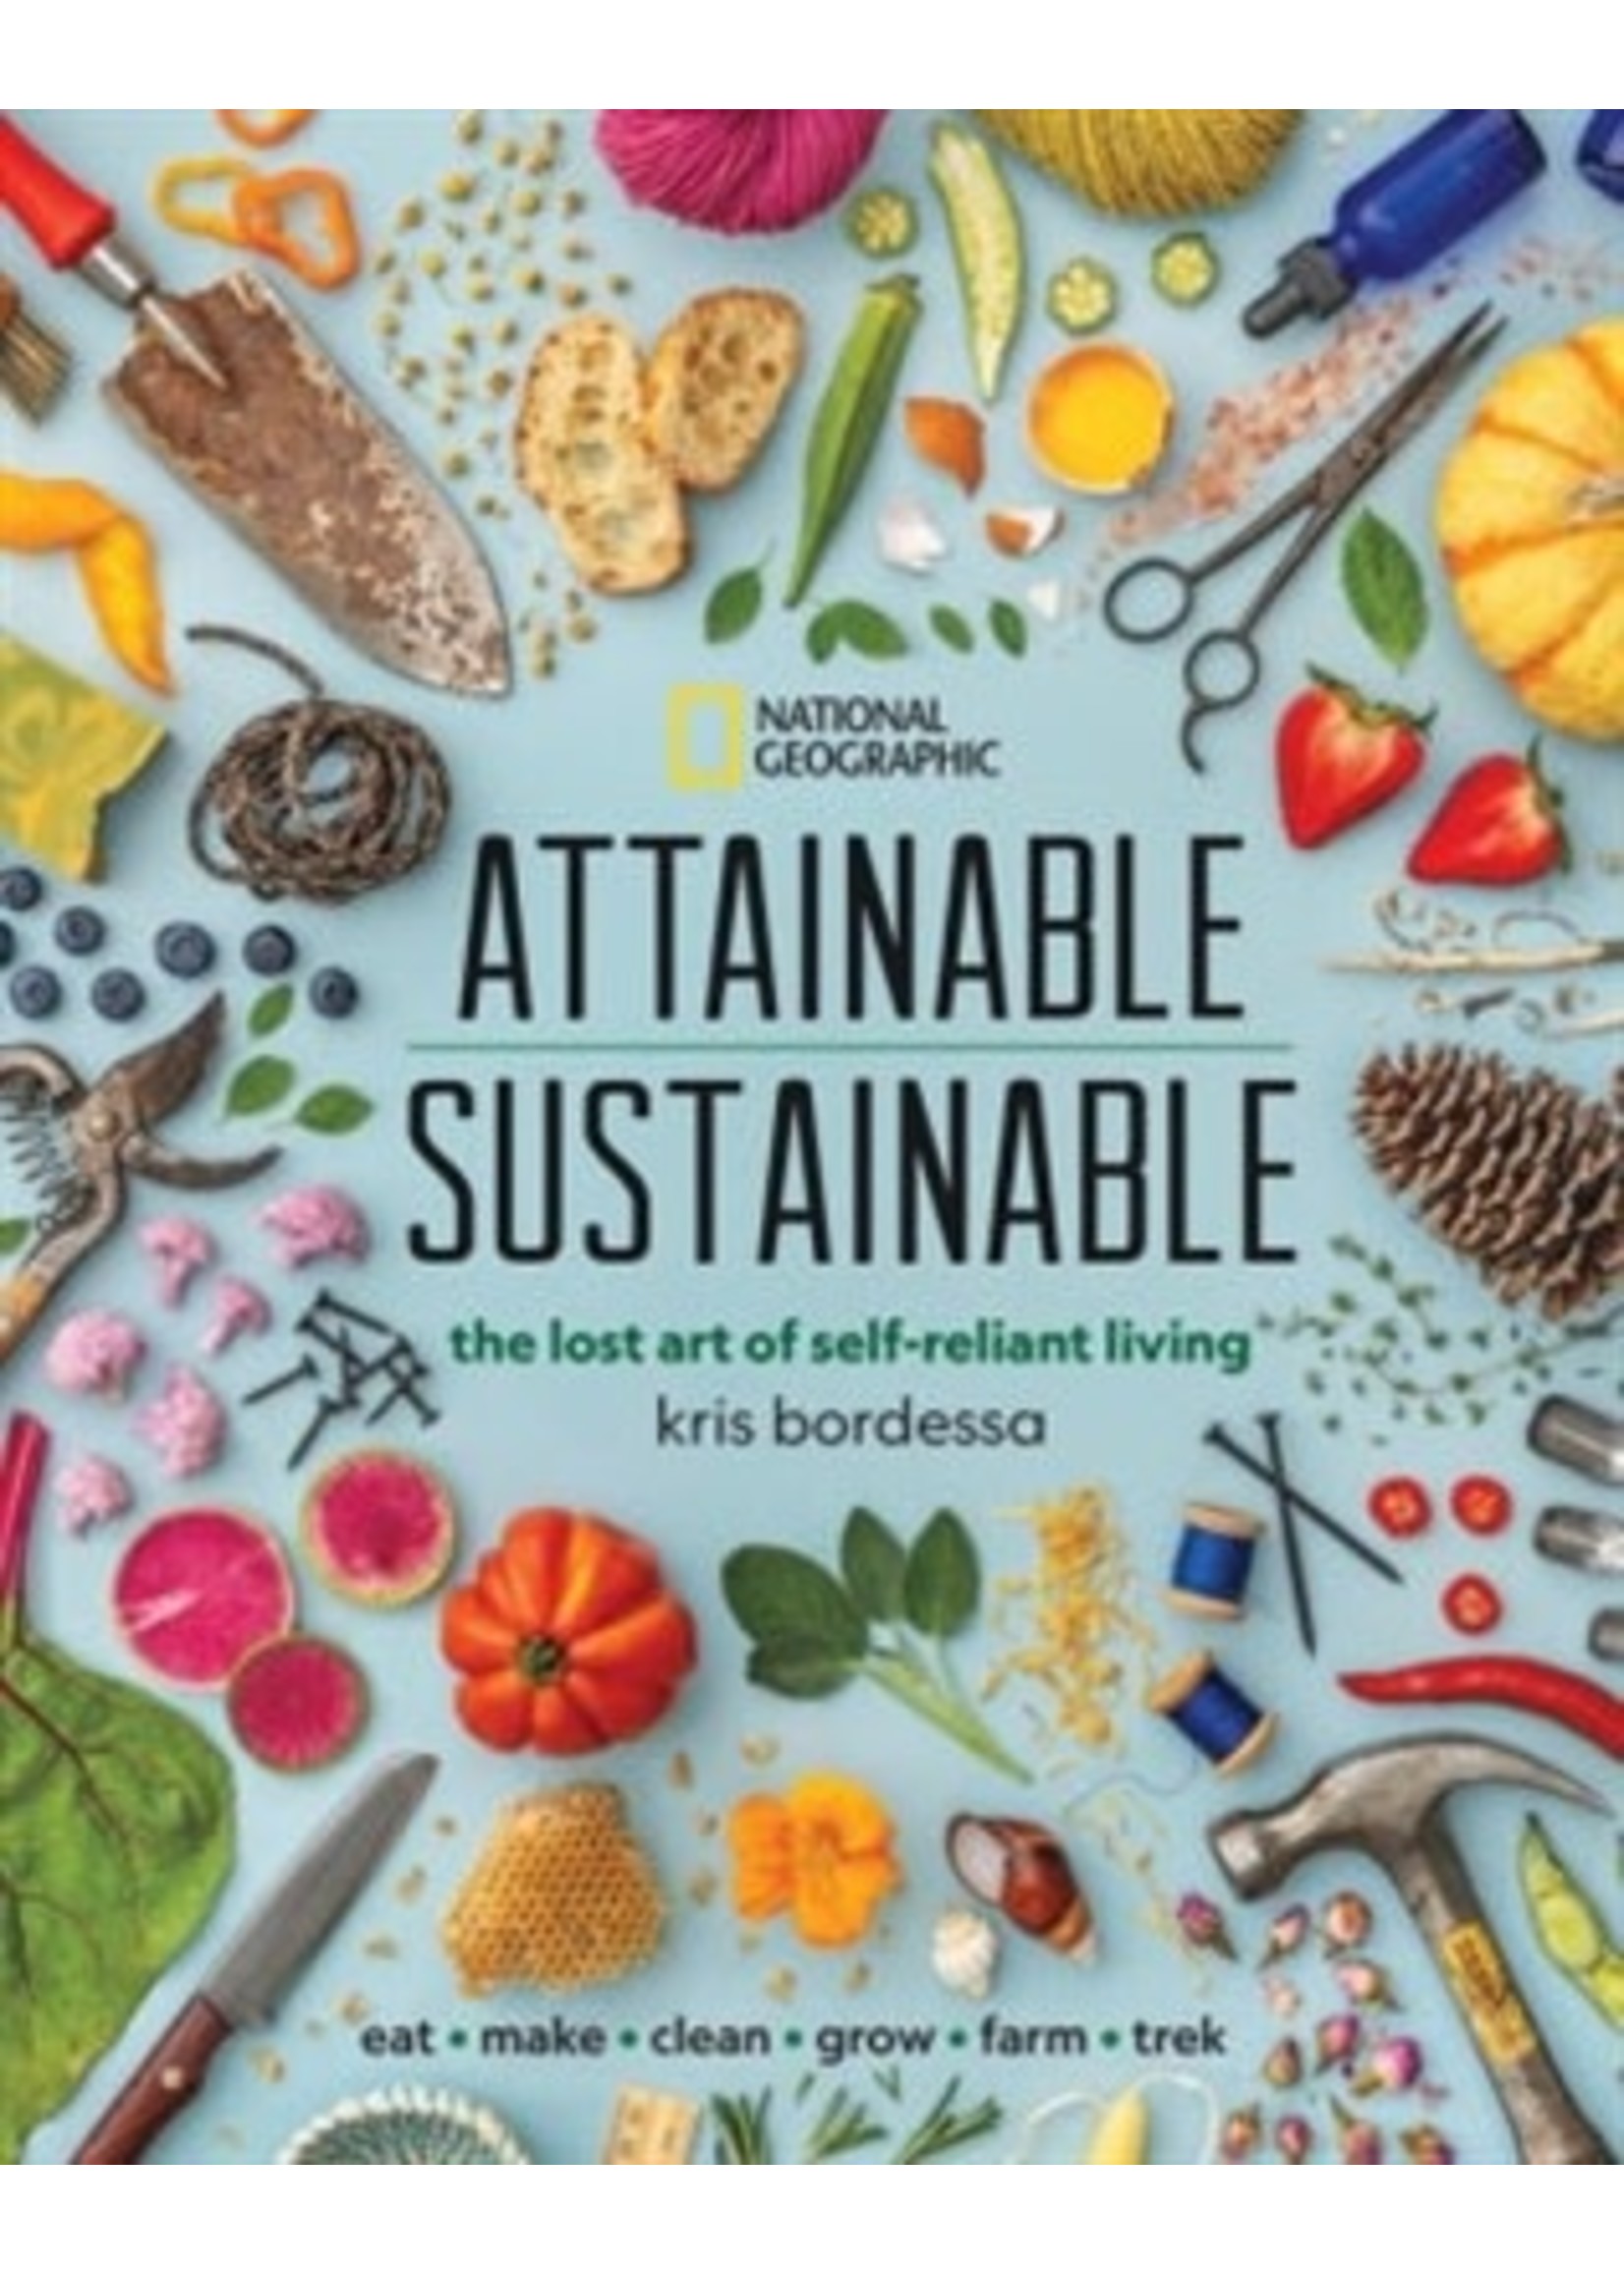 Attainable Sustainable: The Lost Art of Self-reliant Living